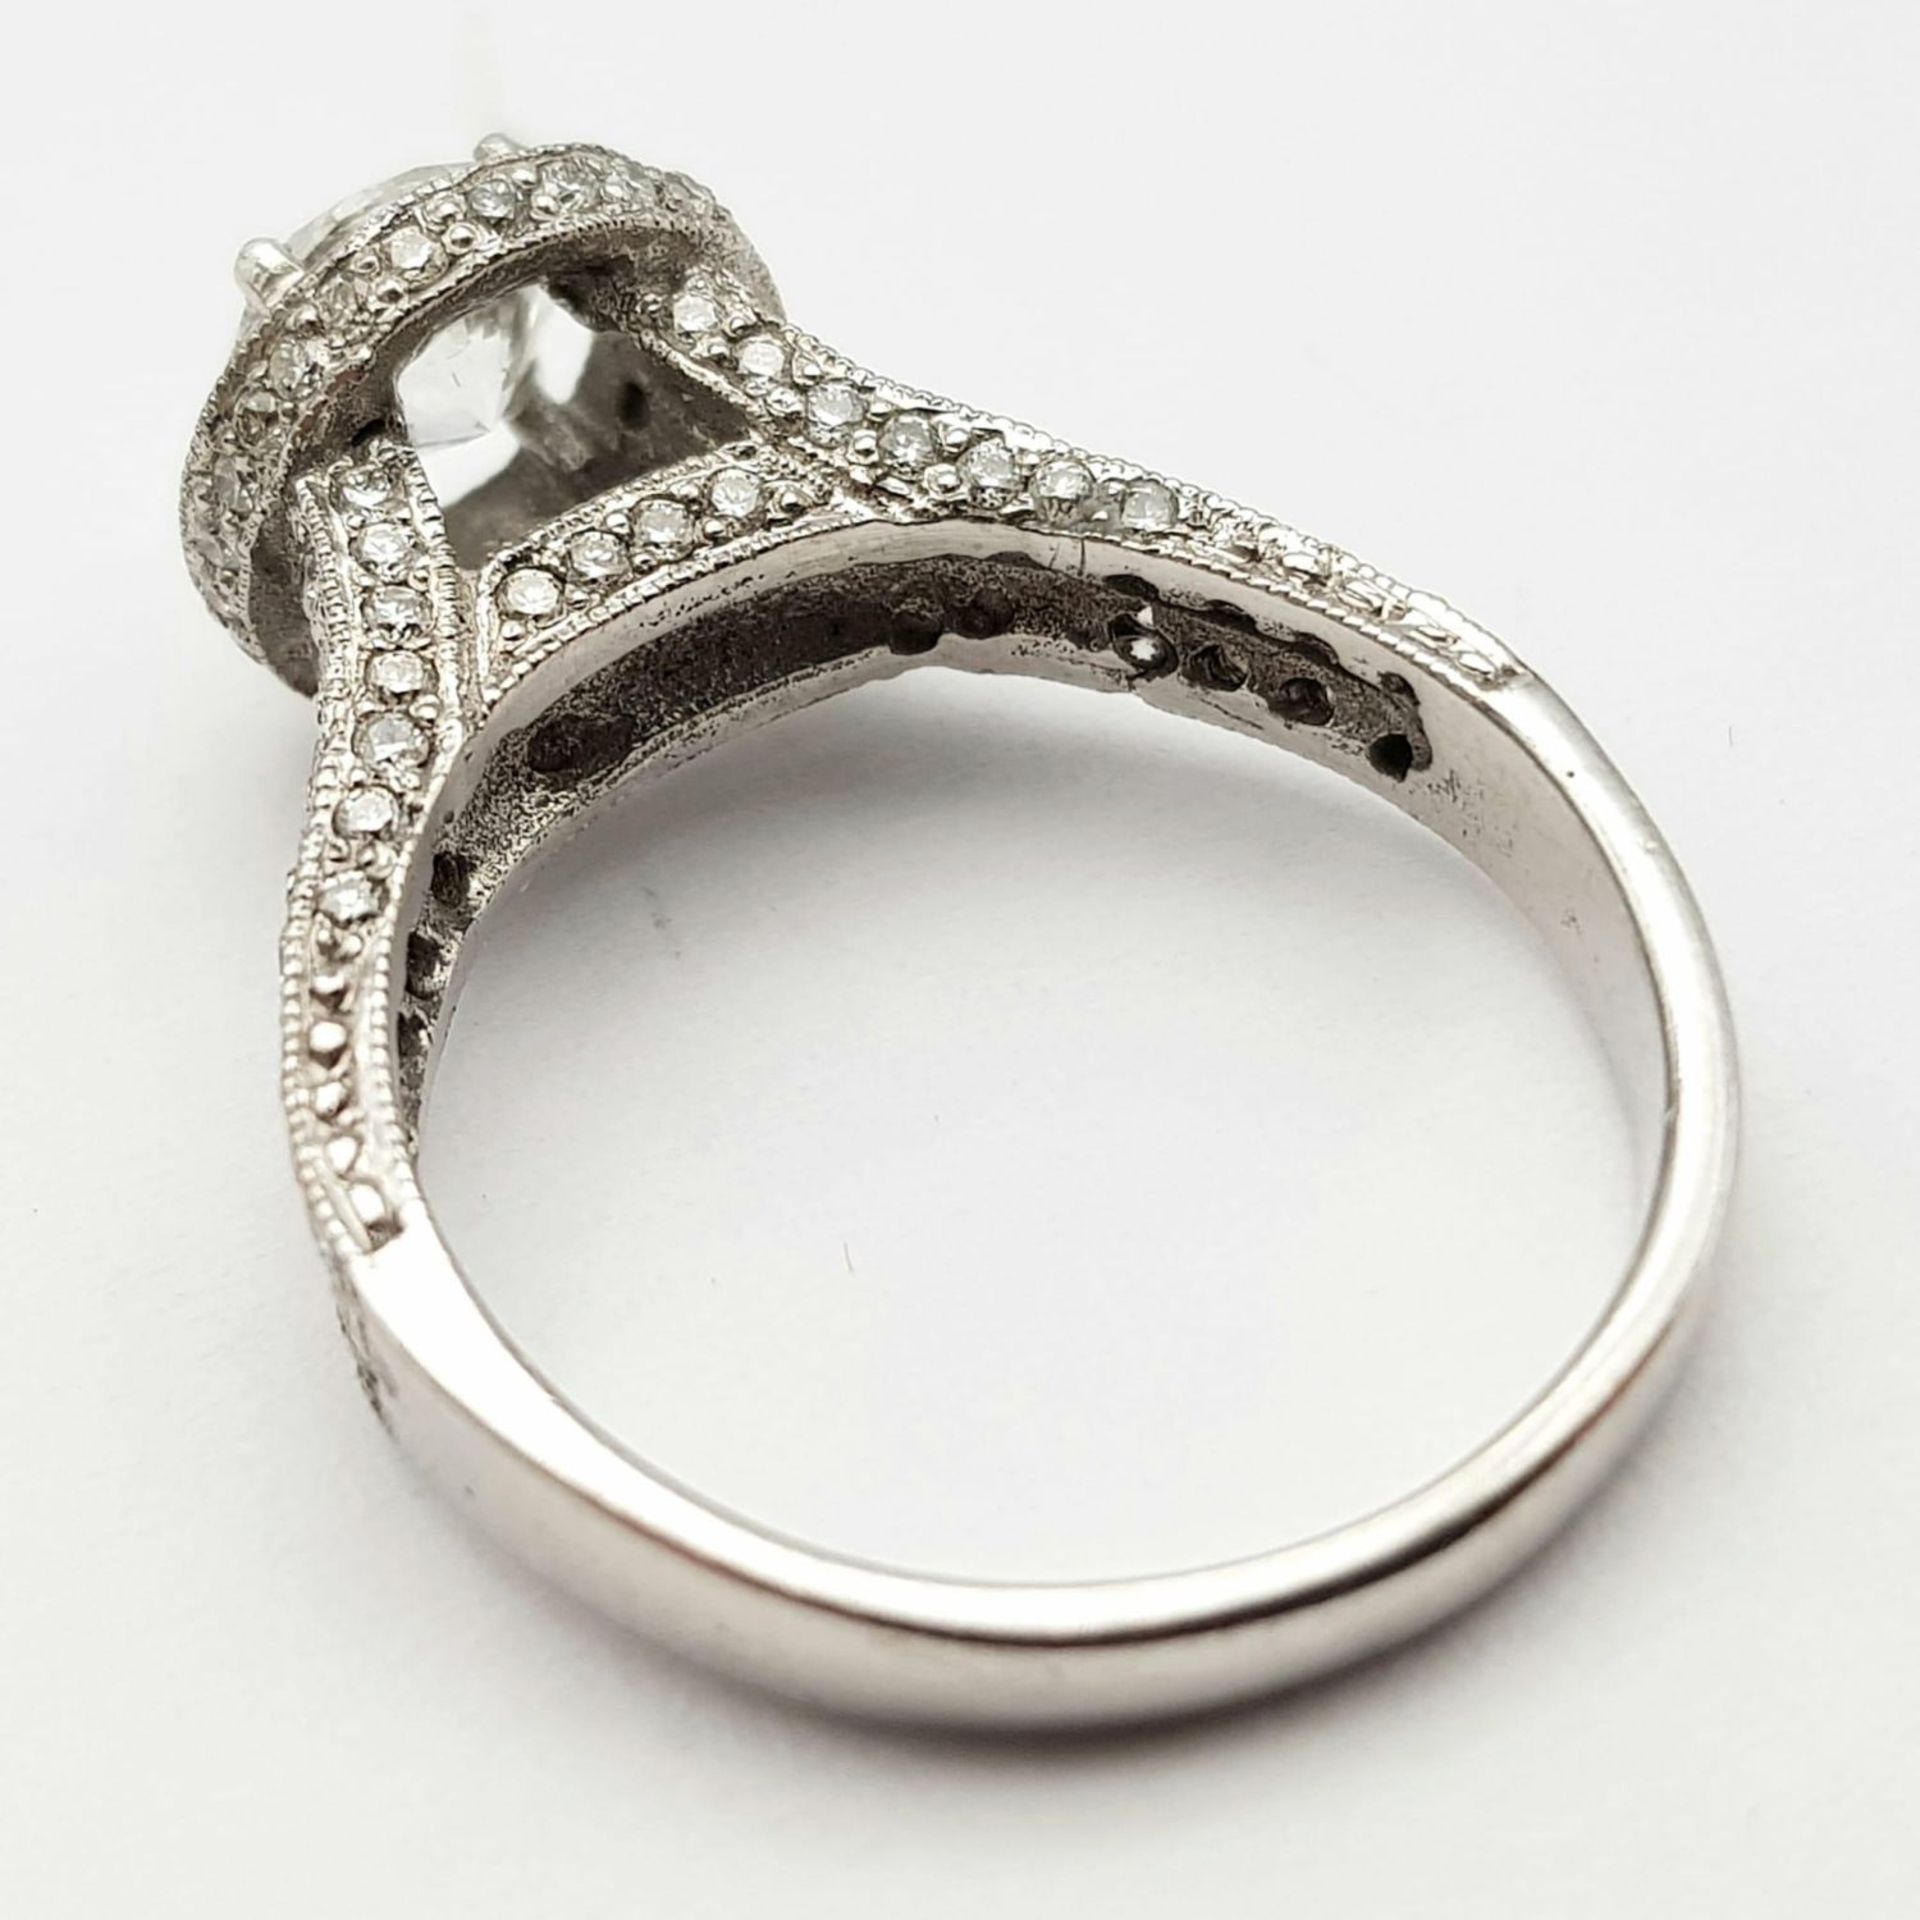 An 18 K white gold ring with a brilliant cut diamond (1.01 carats) surrounded by diamonds on the top - Bild 21 aus 22